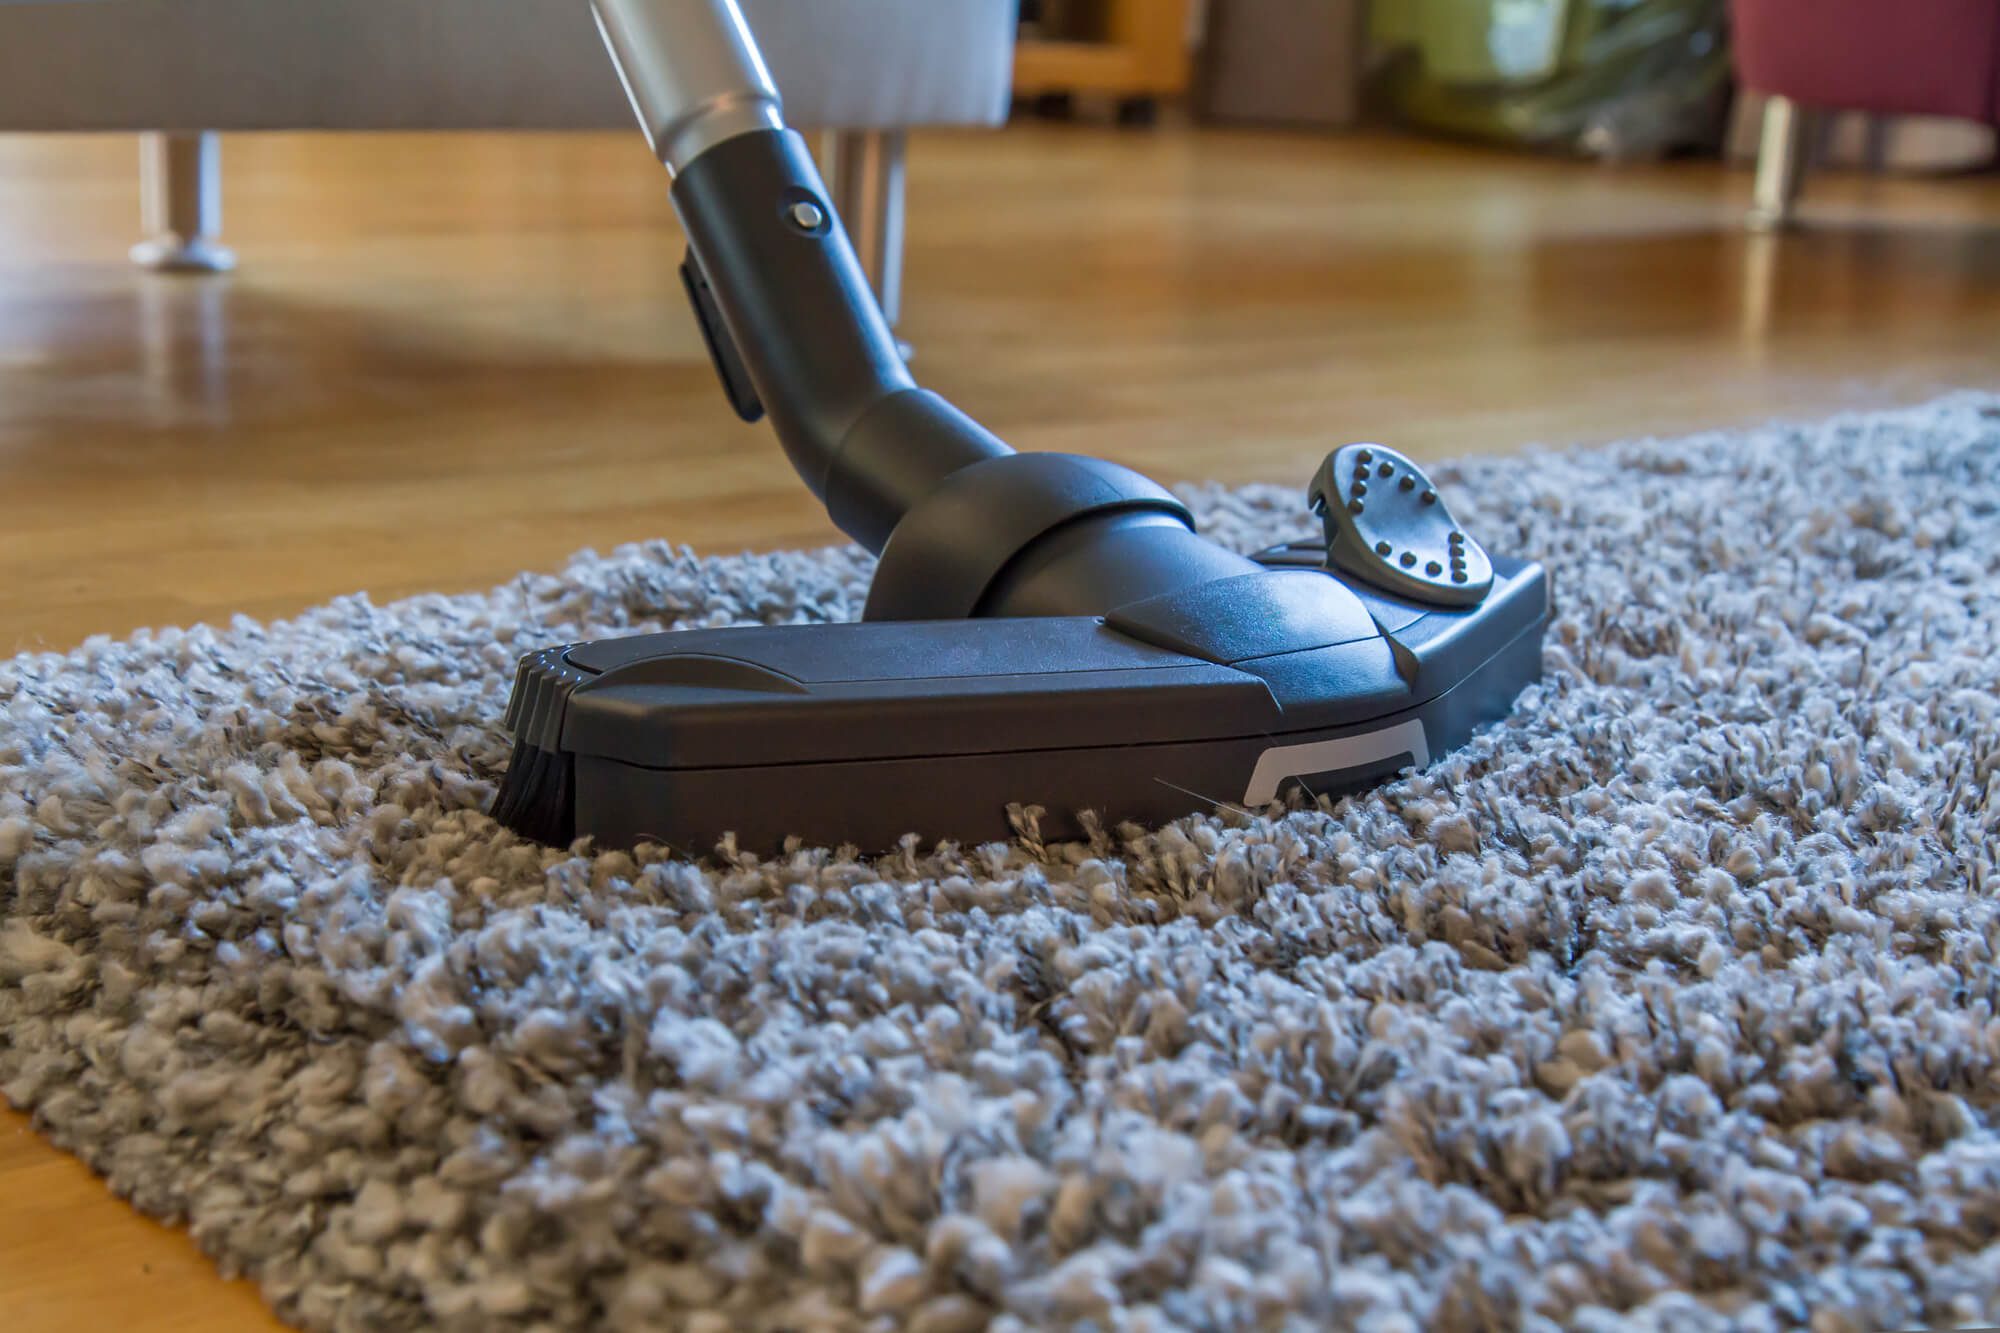 Carpet cleaning services in Rockville MD